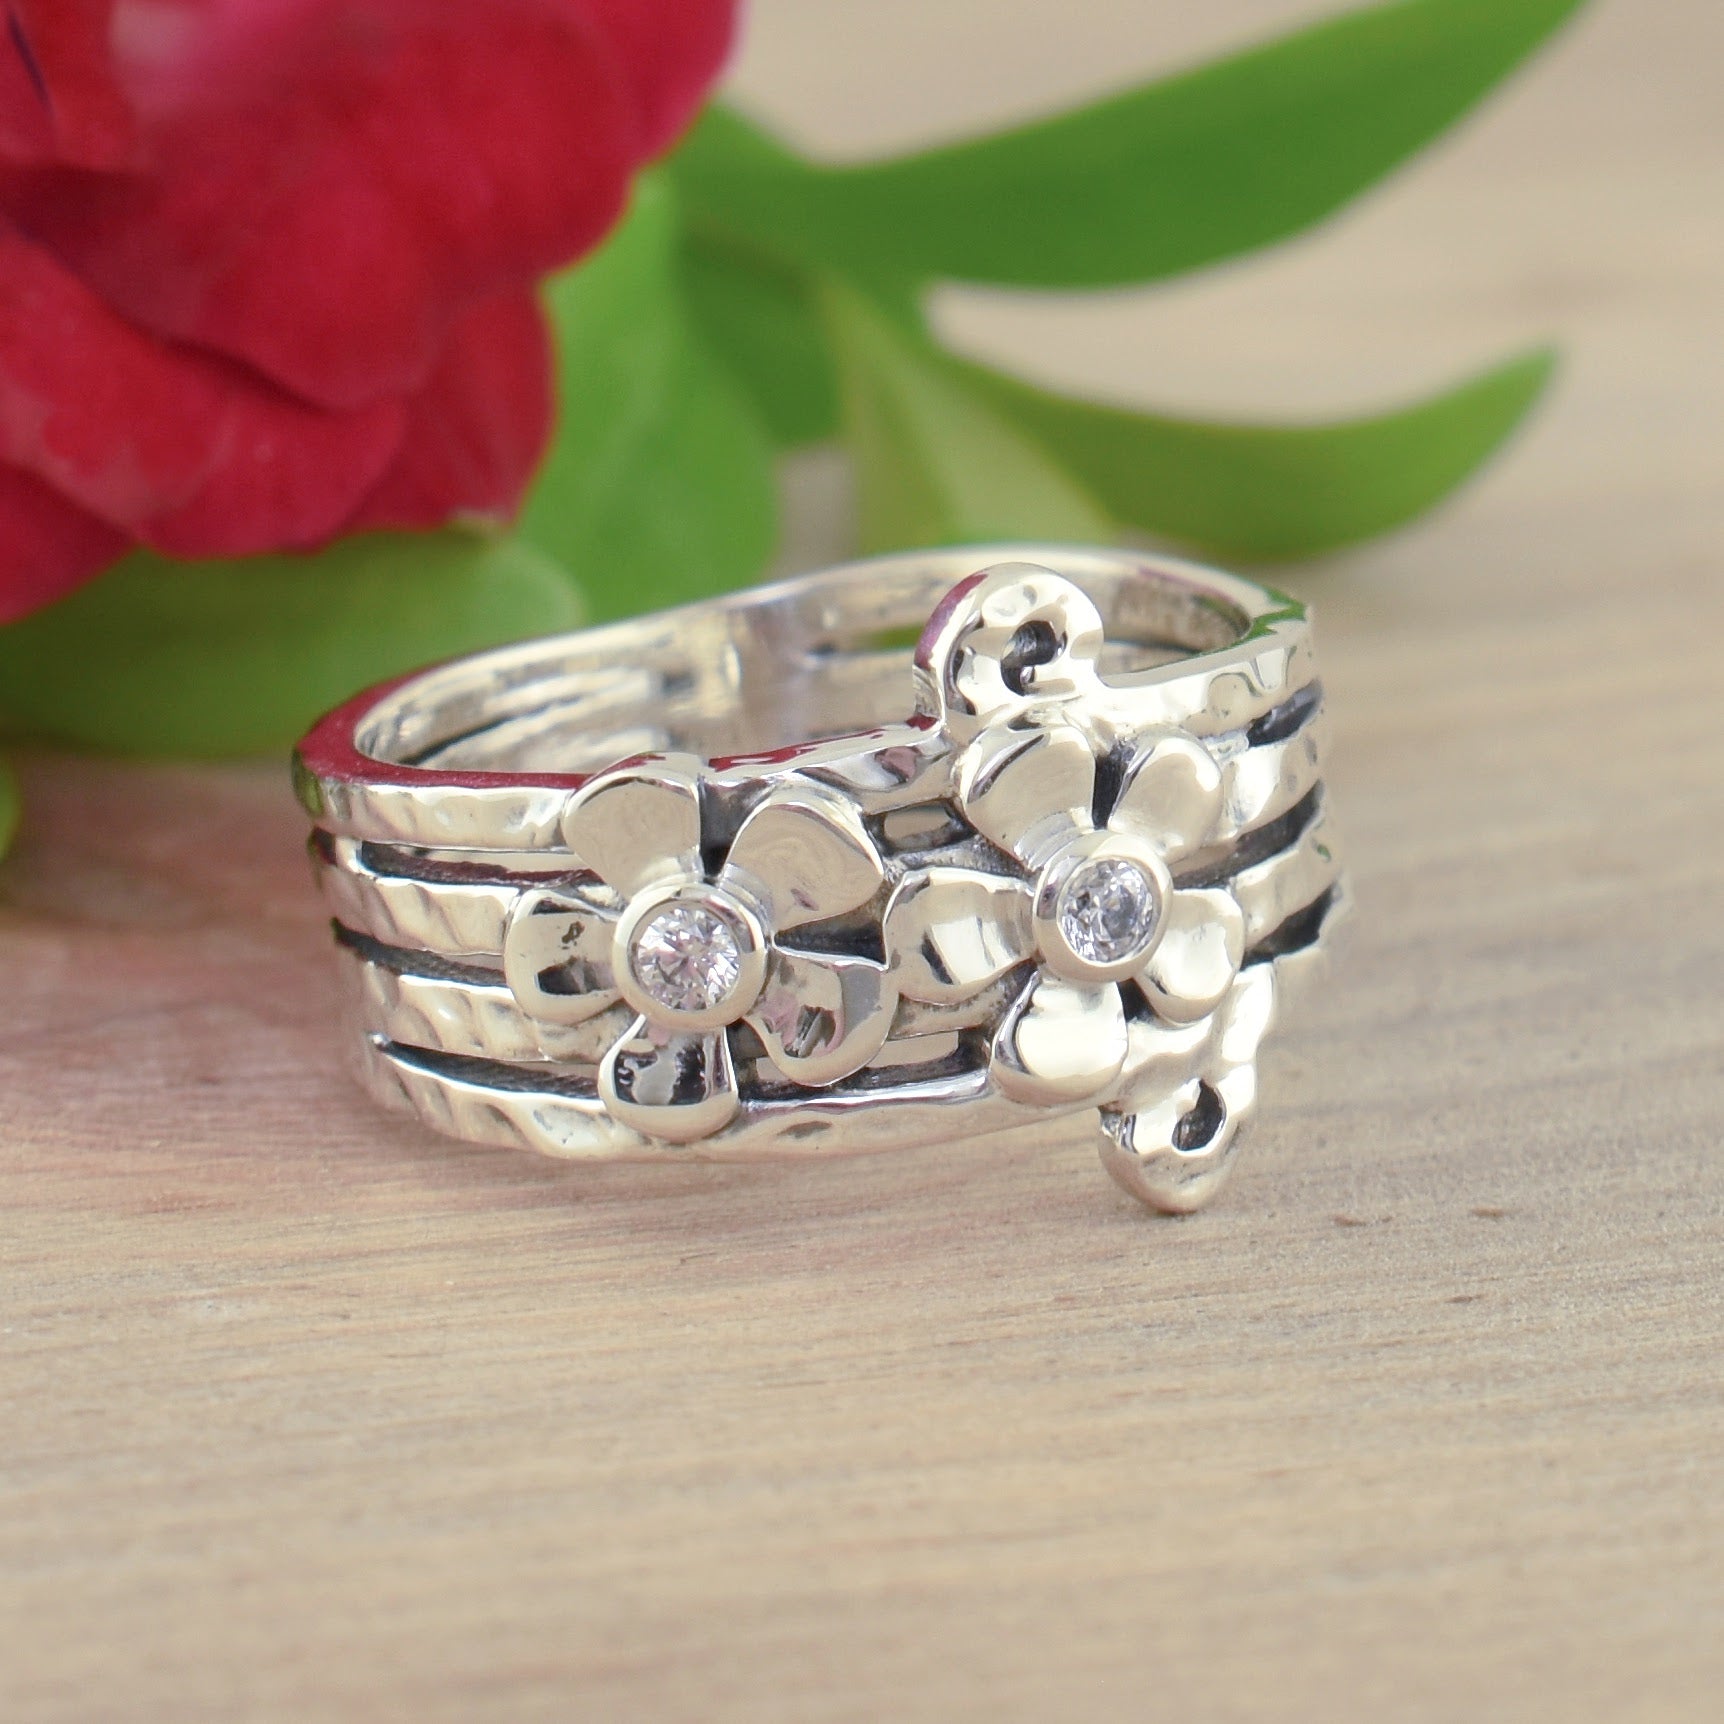 .925 sterling silver hammered ring featuring flowers and CZs